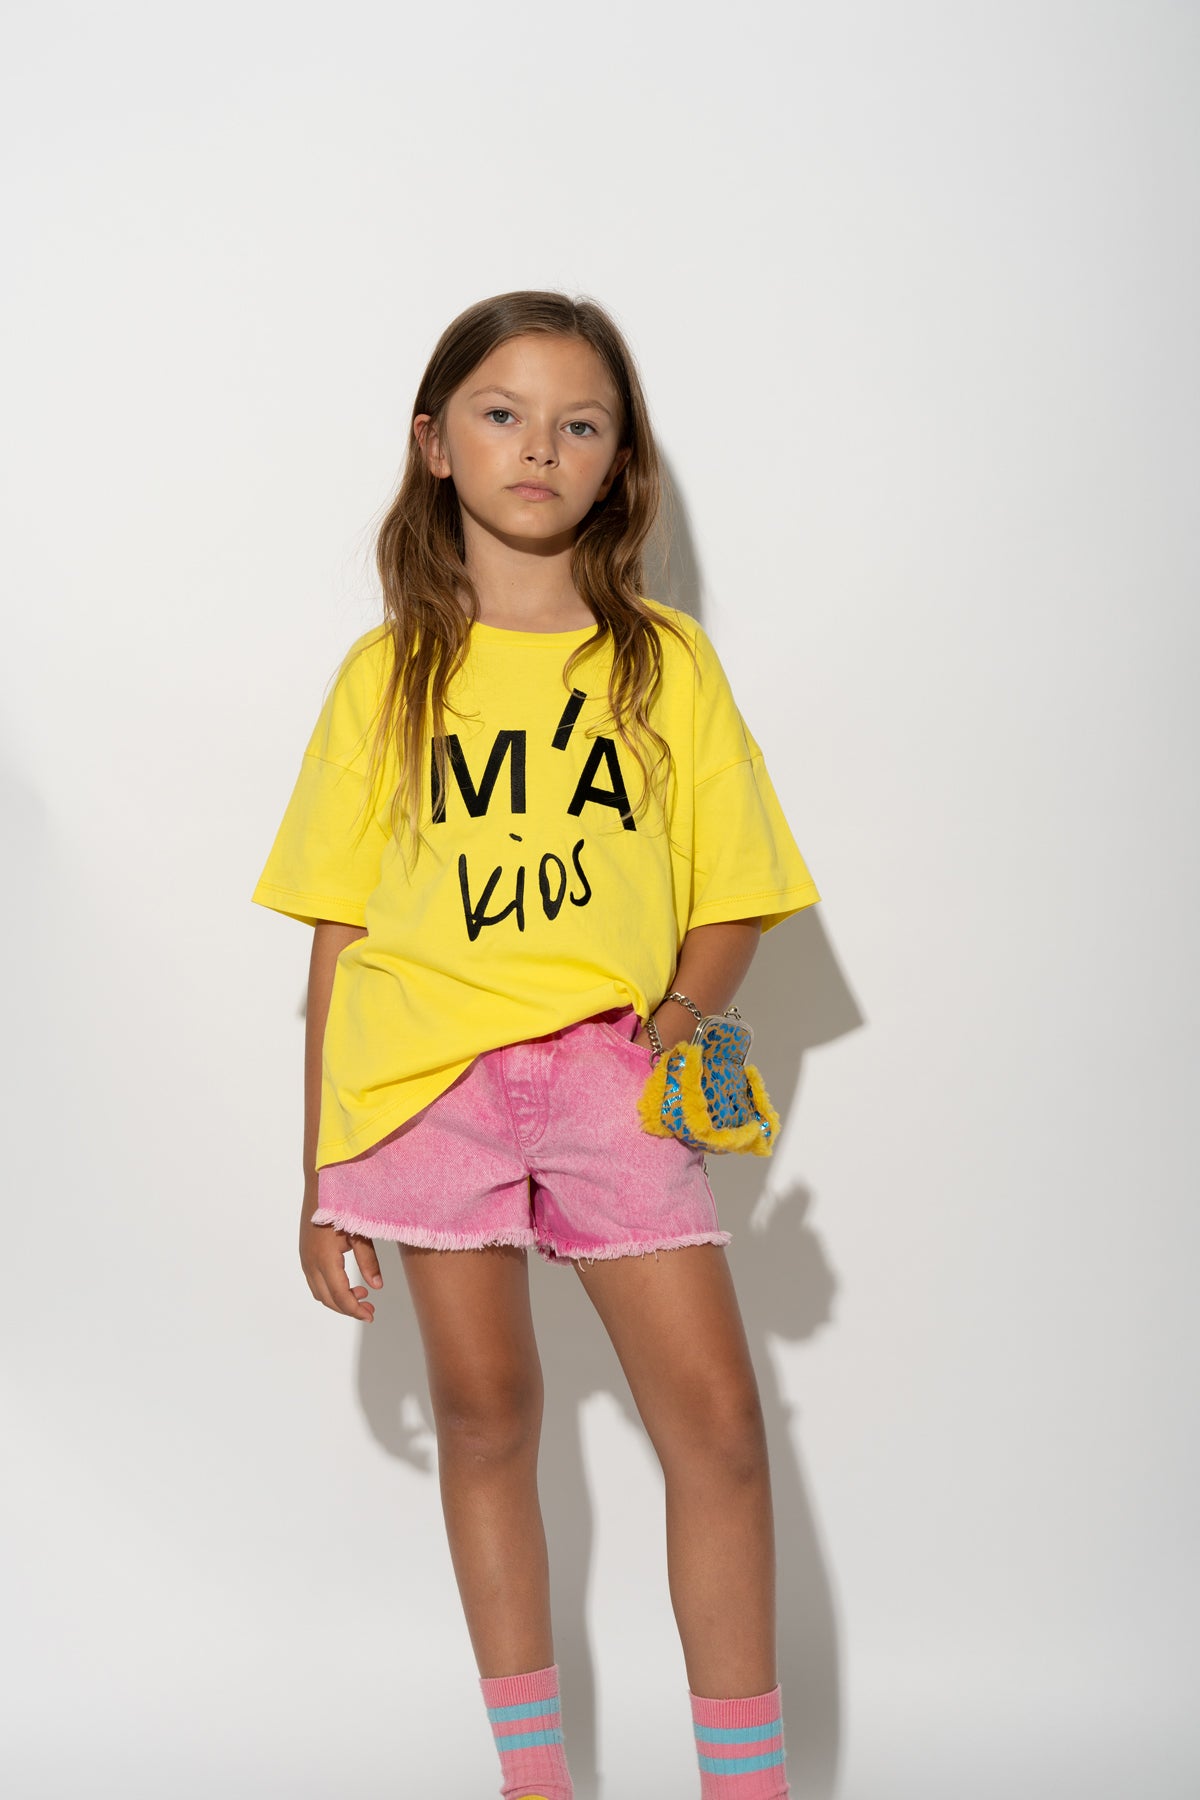 YELLOW T-SHIRT WITH EMBROIDERED LOGO makids